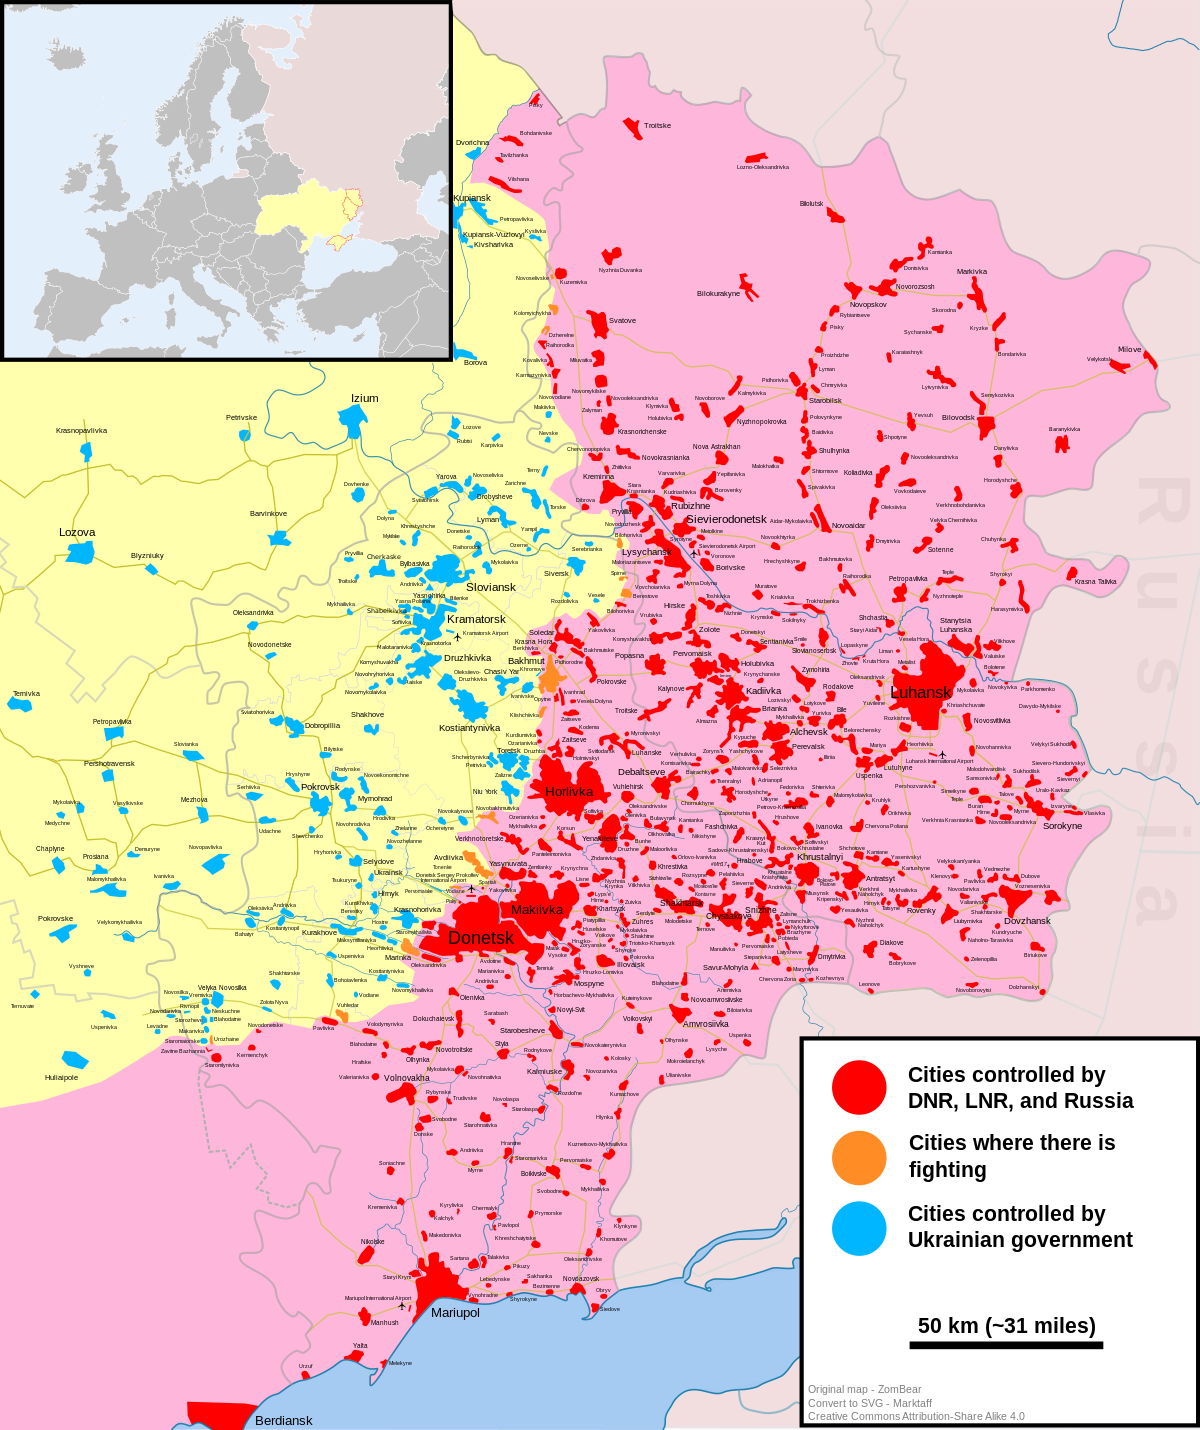 https://upload.wikimedia.org/wikipedia/commons/thumb/9/91/Map_of_the_war_in_Donbass.svg/1200px-Map_of_the_war_in_Donbass.svg.png